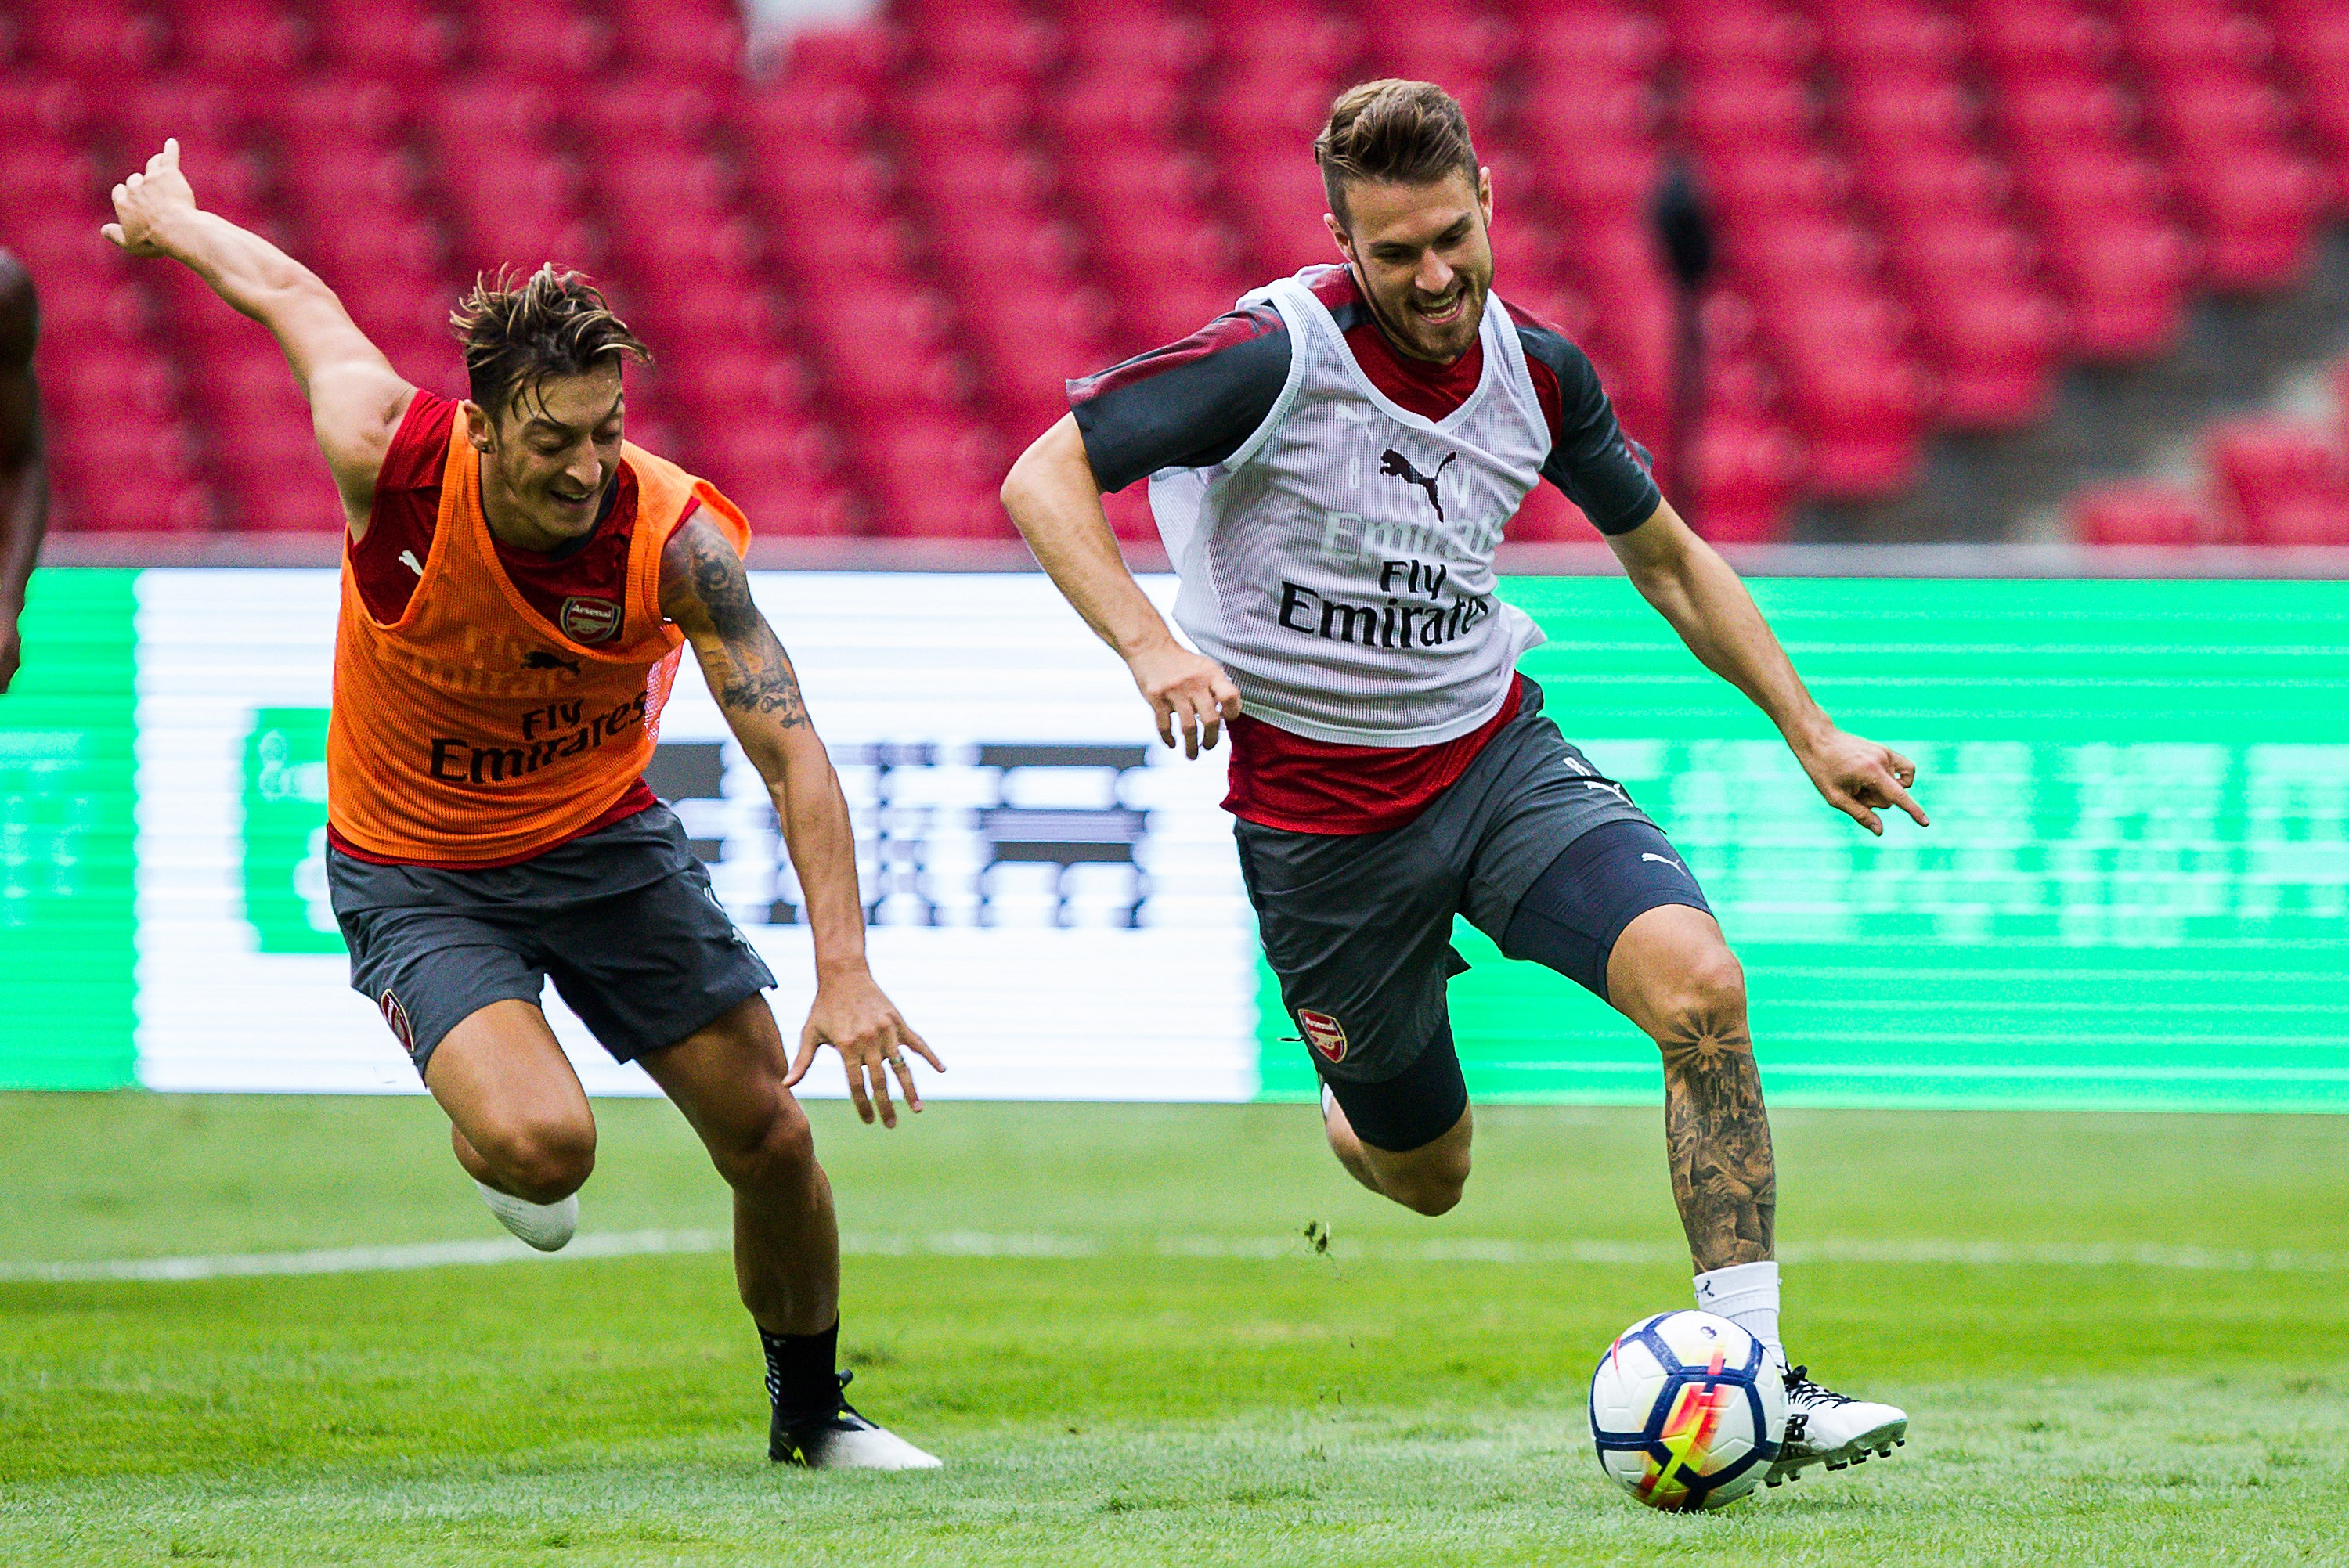 BEIJING, CHINA - JULY 21:  Mesut Ozil  and Aaron Ramsey fight for the ball during a training session at Birds Nest on July 21, 2017 in Beijing, China.  (Photo by Yifan Ding/Getty Images)